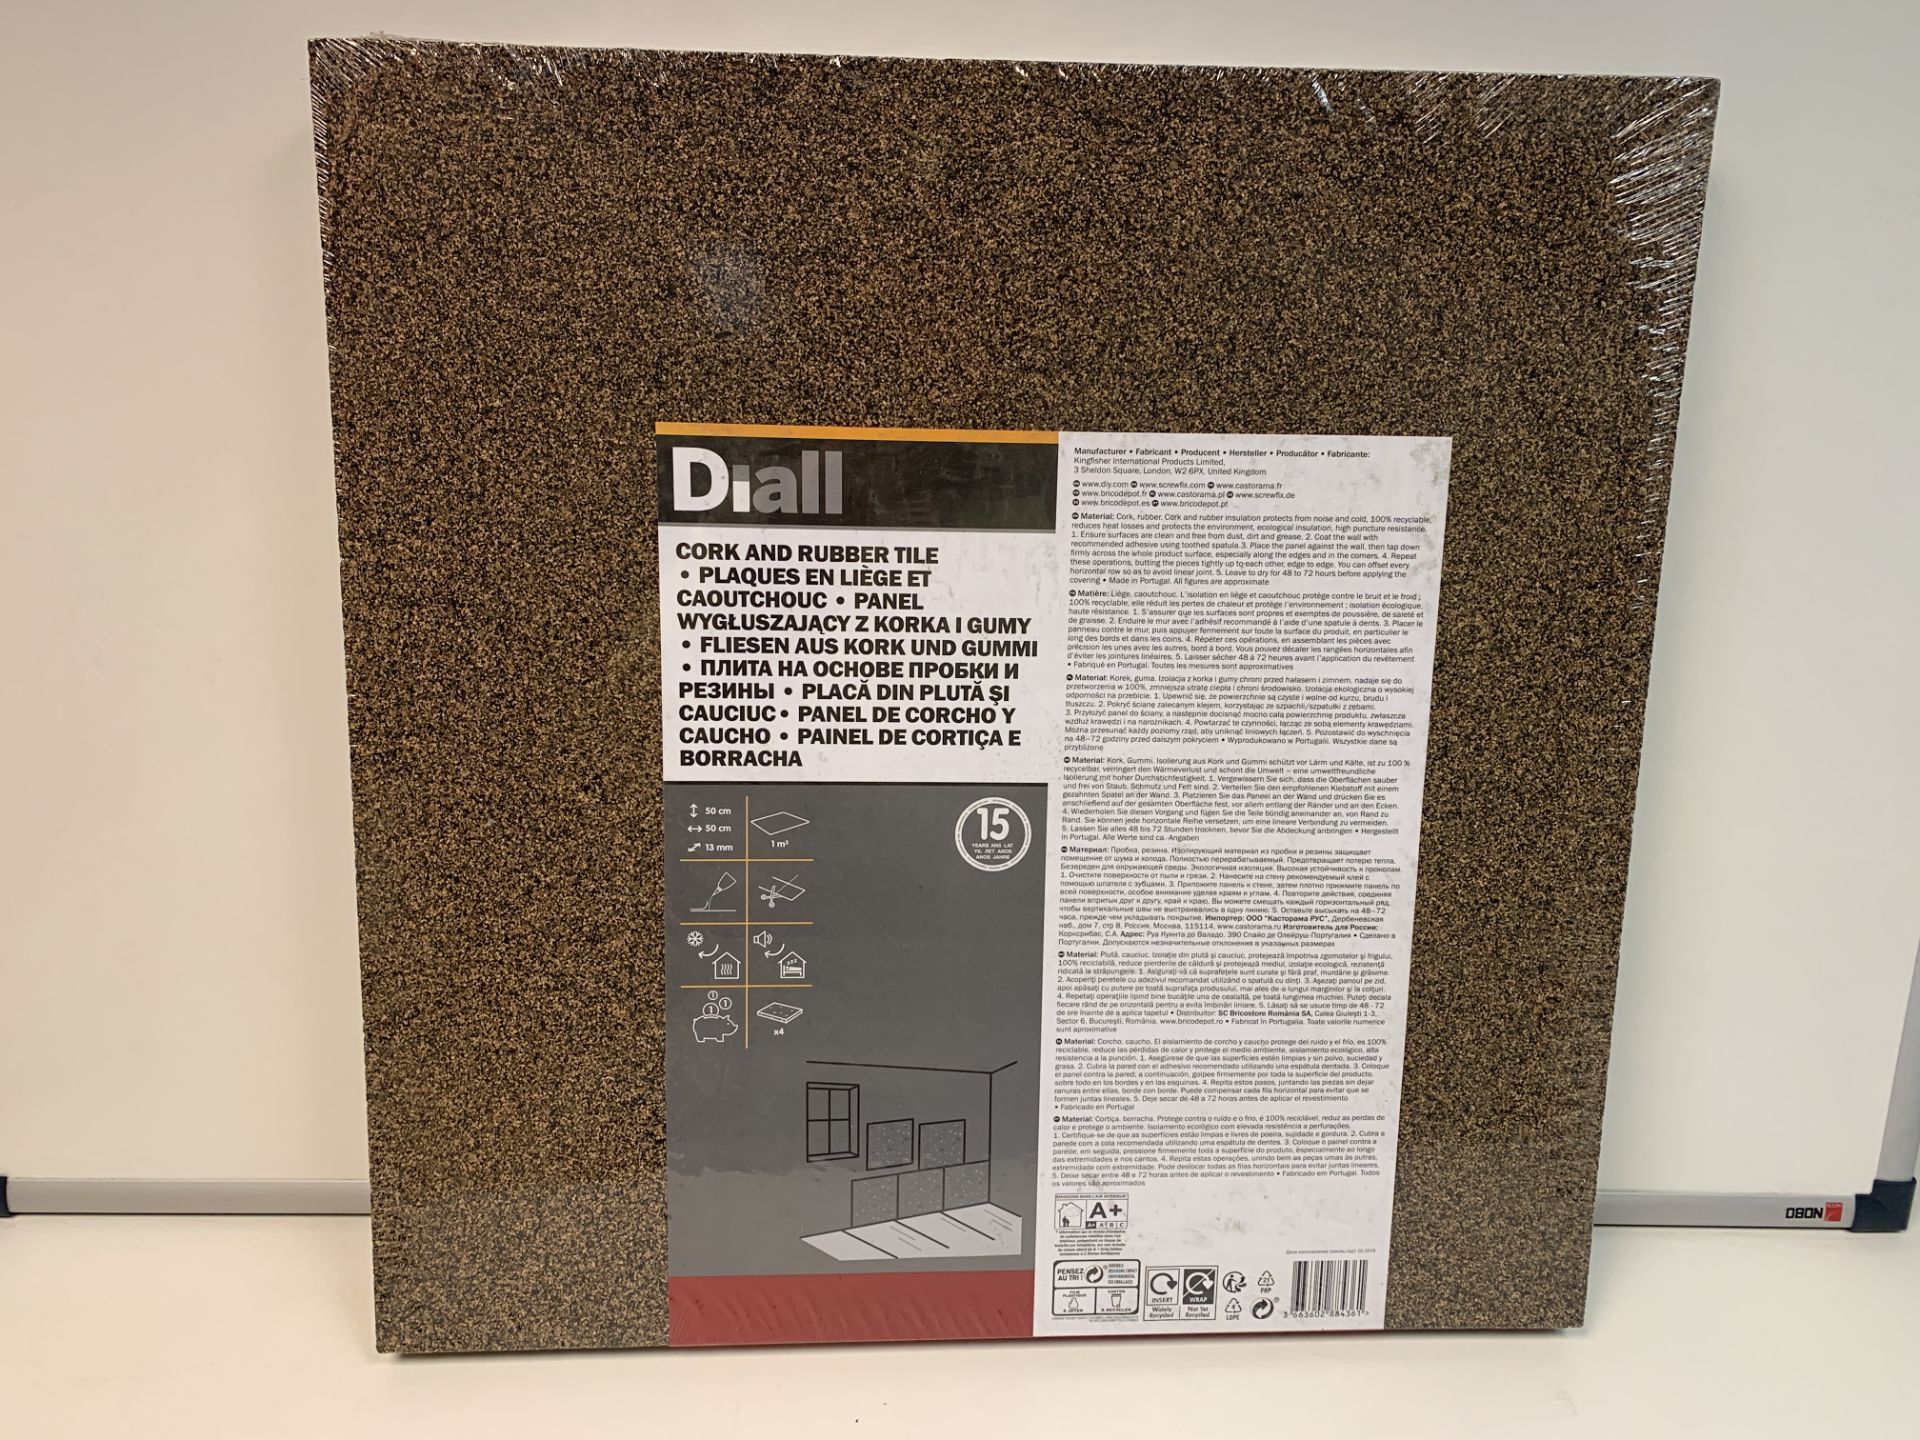 6 X NEW PACKAGED PACKS OF 4 DIALL CORK & RUBBER TILES FOR INSULATION PROTECTION FROM NOISE AND COLD.